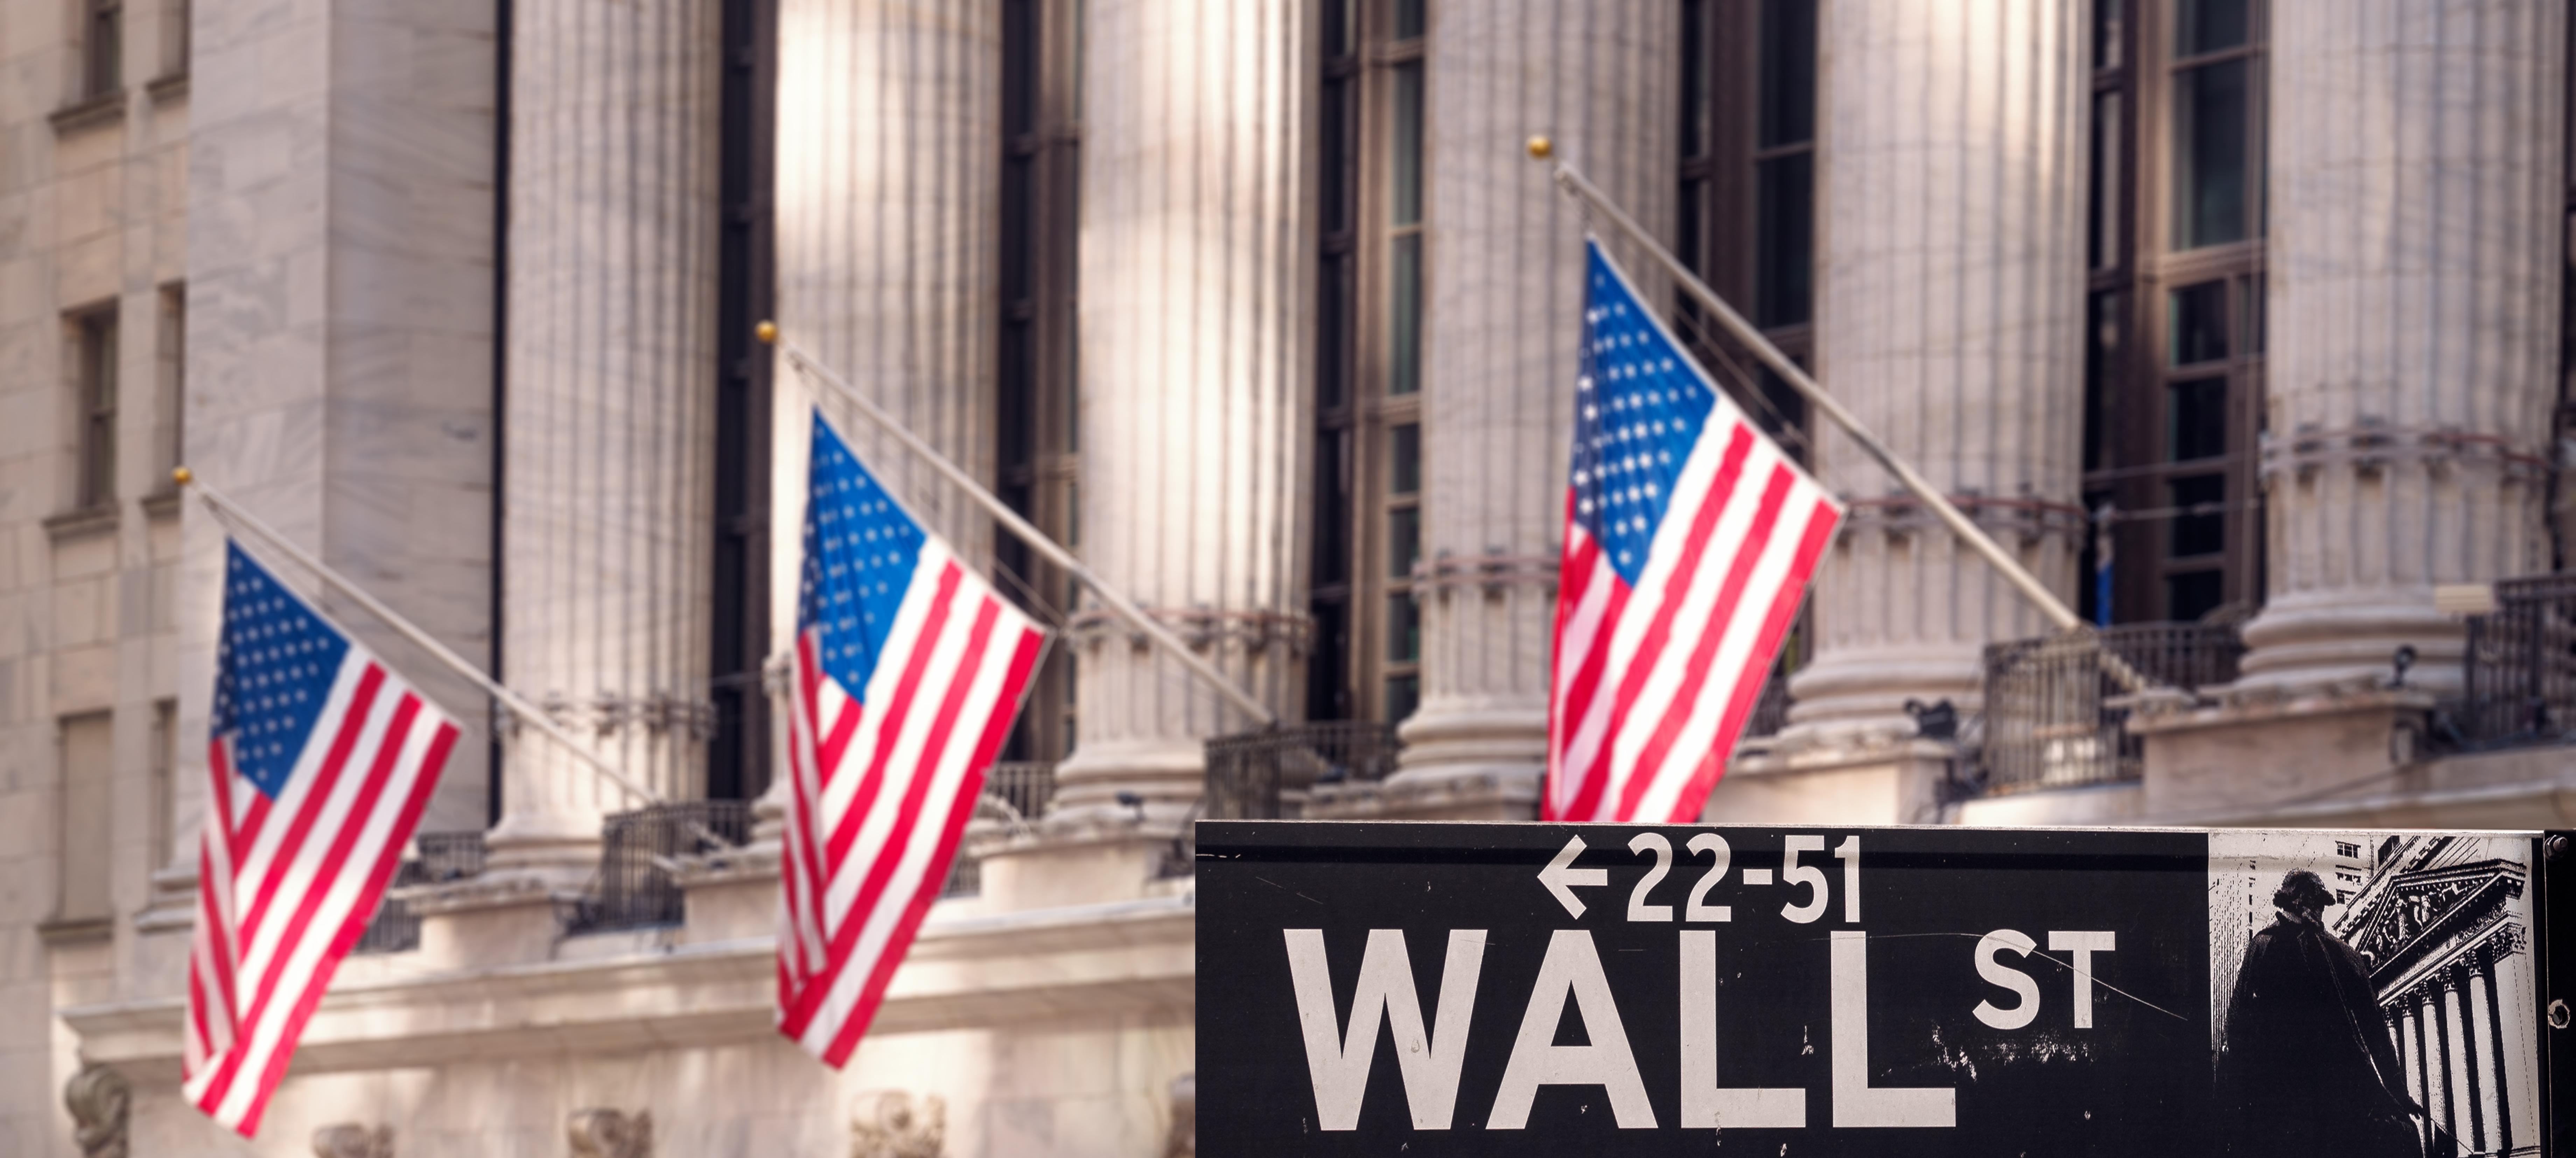 Wall Street sign in front of building with American flags